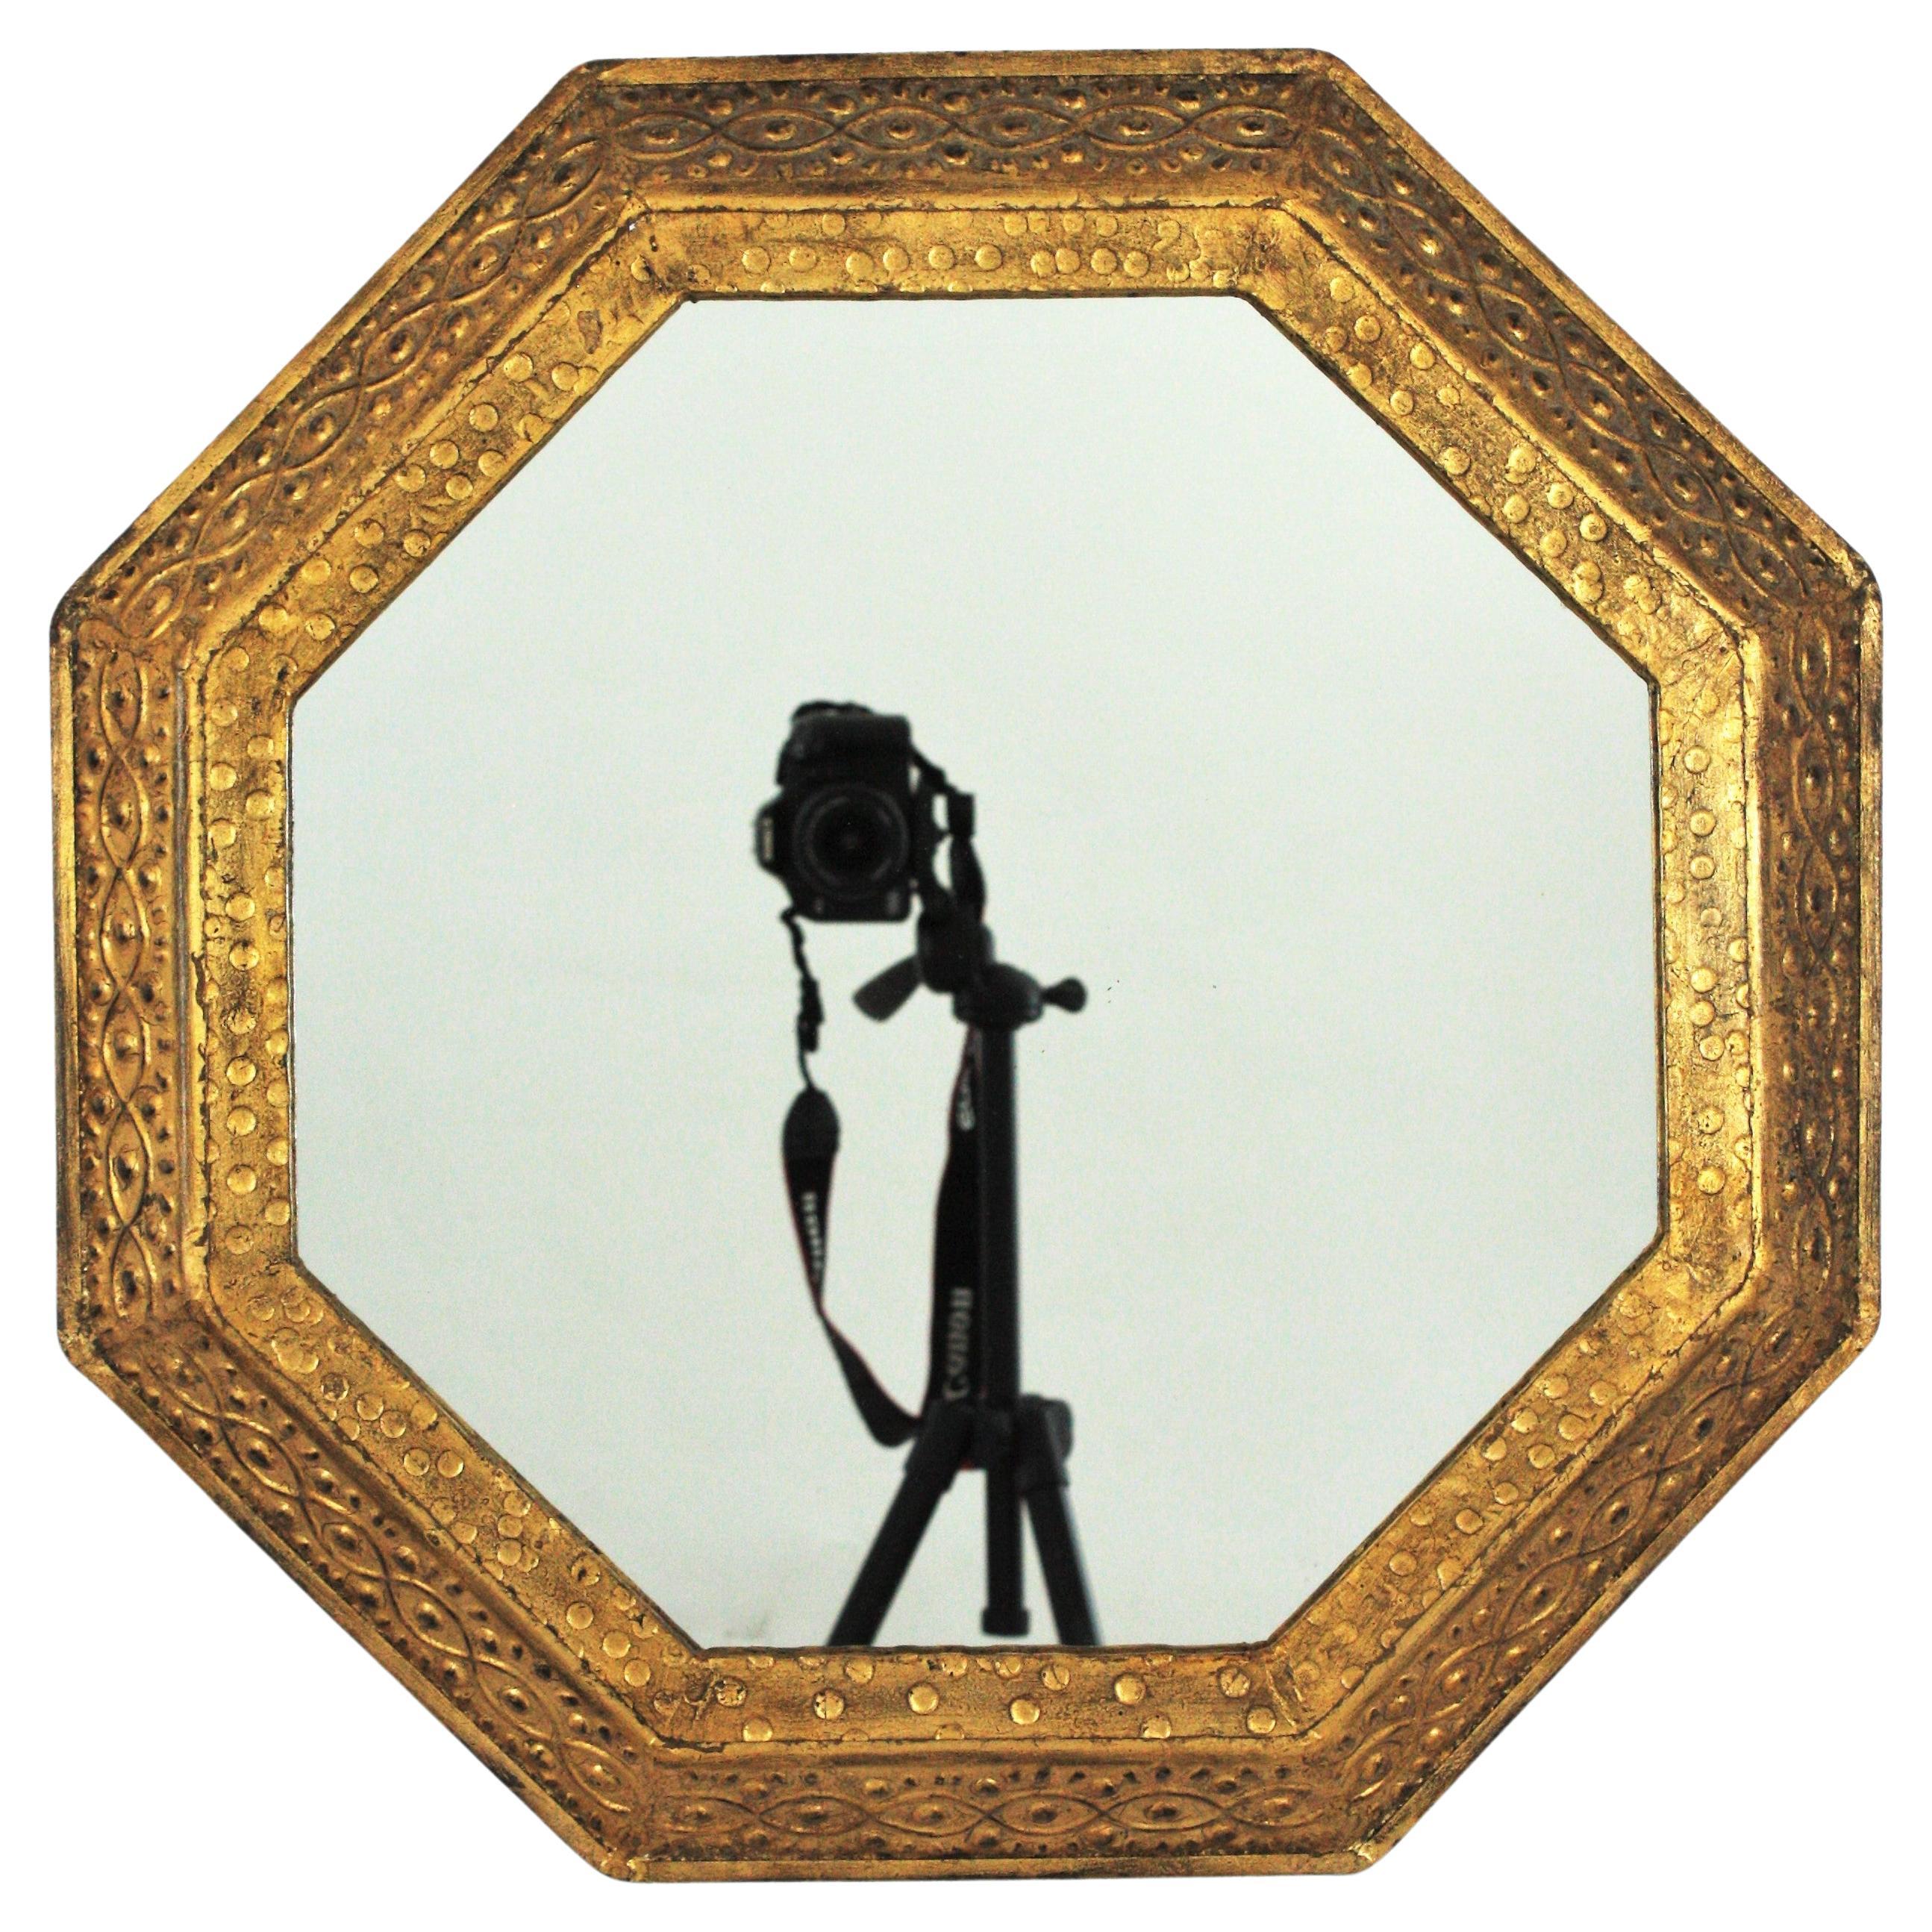 Spanish Octagonal Mirror in Repousse Gilt Iron by Ferro Art, 1950s For Sale